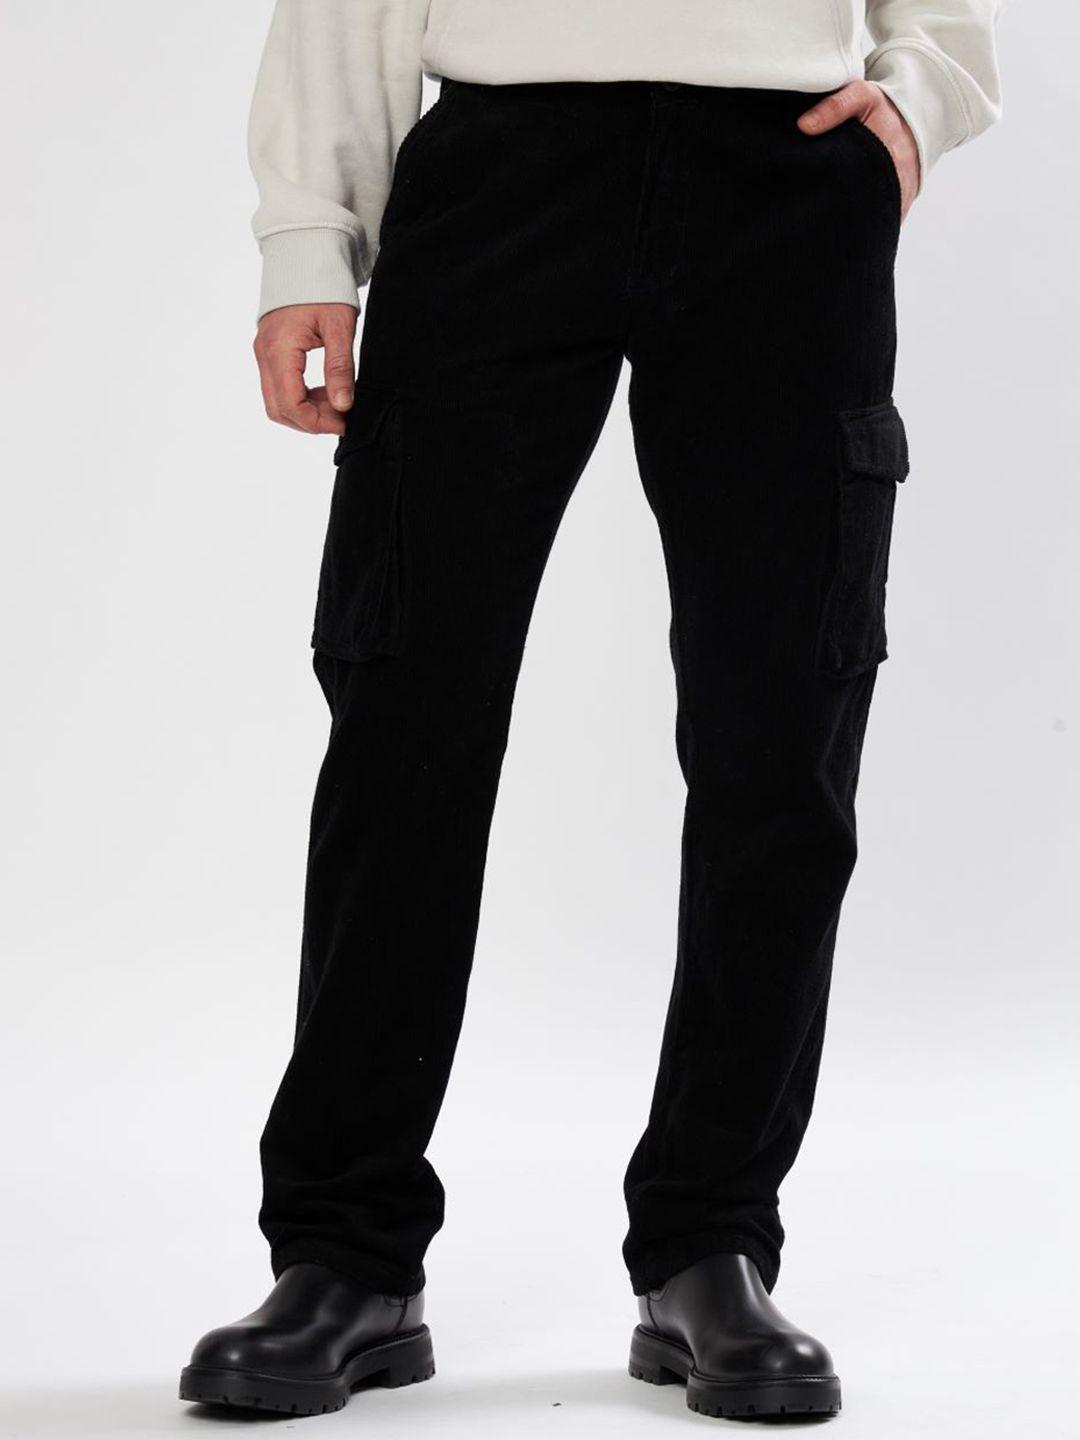 united-denim-men-relaxed-fit-corduroy-cargo-trousers